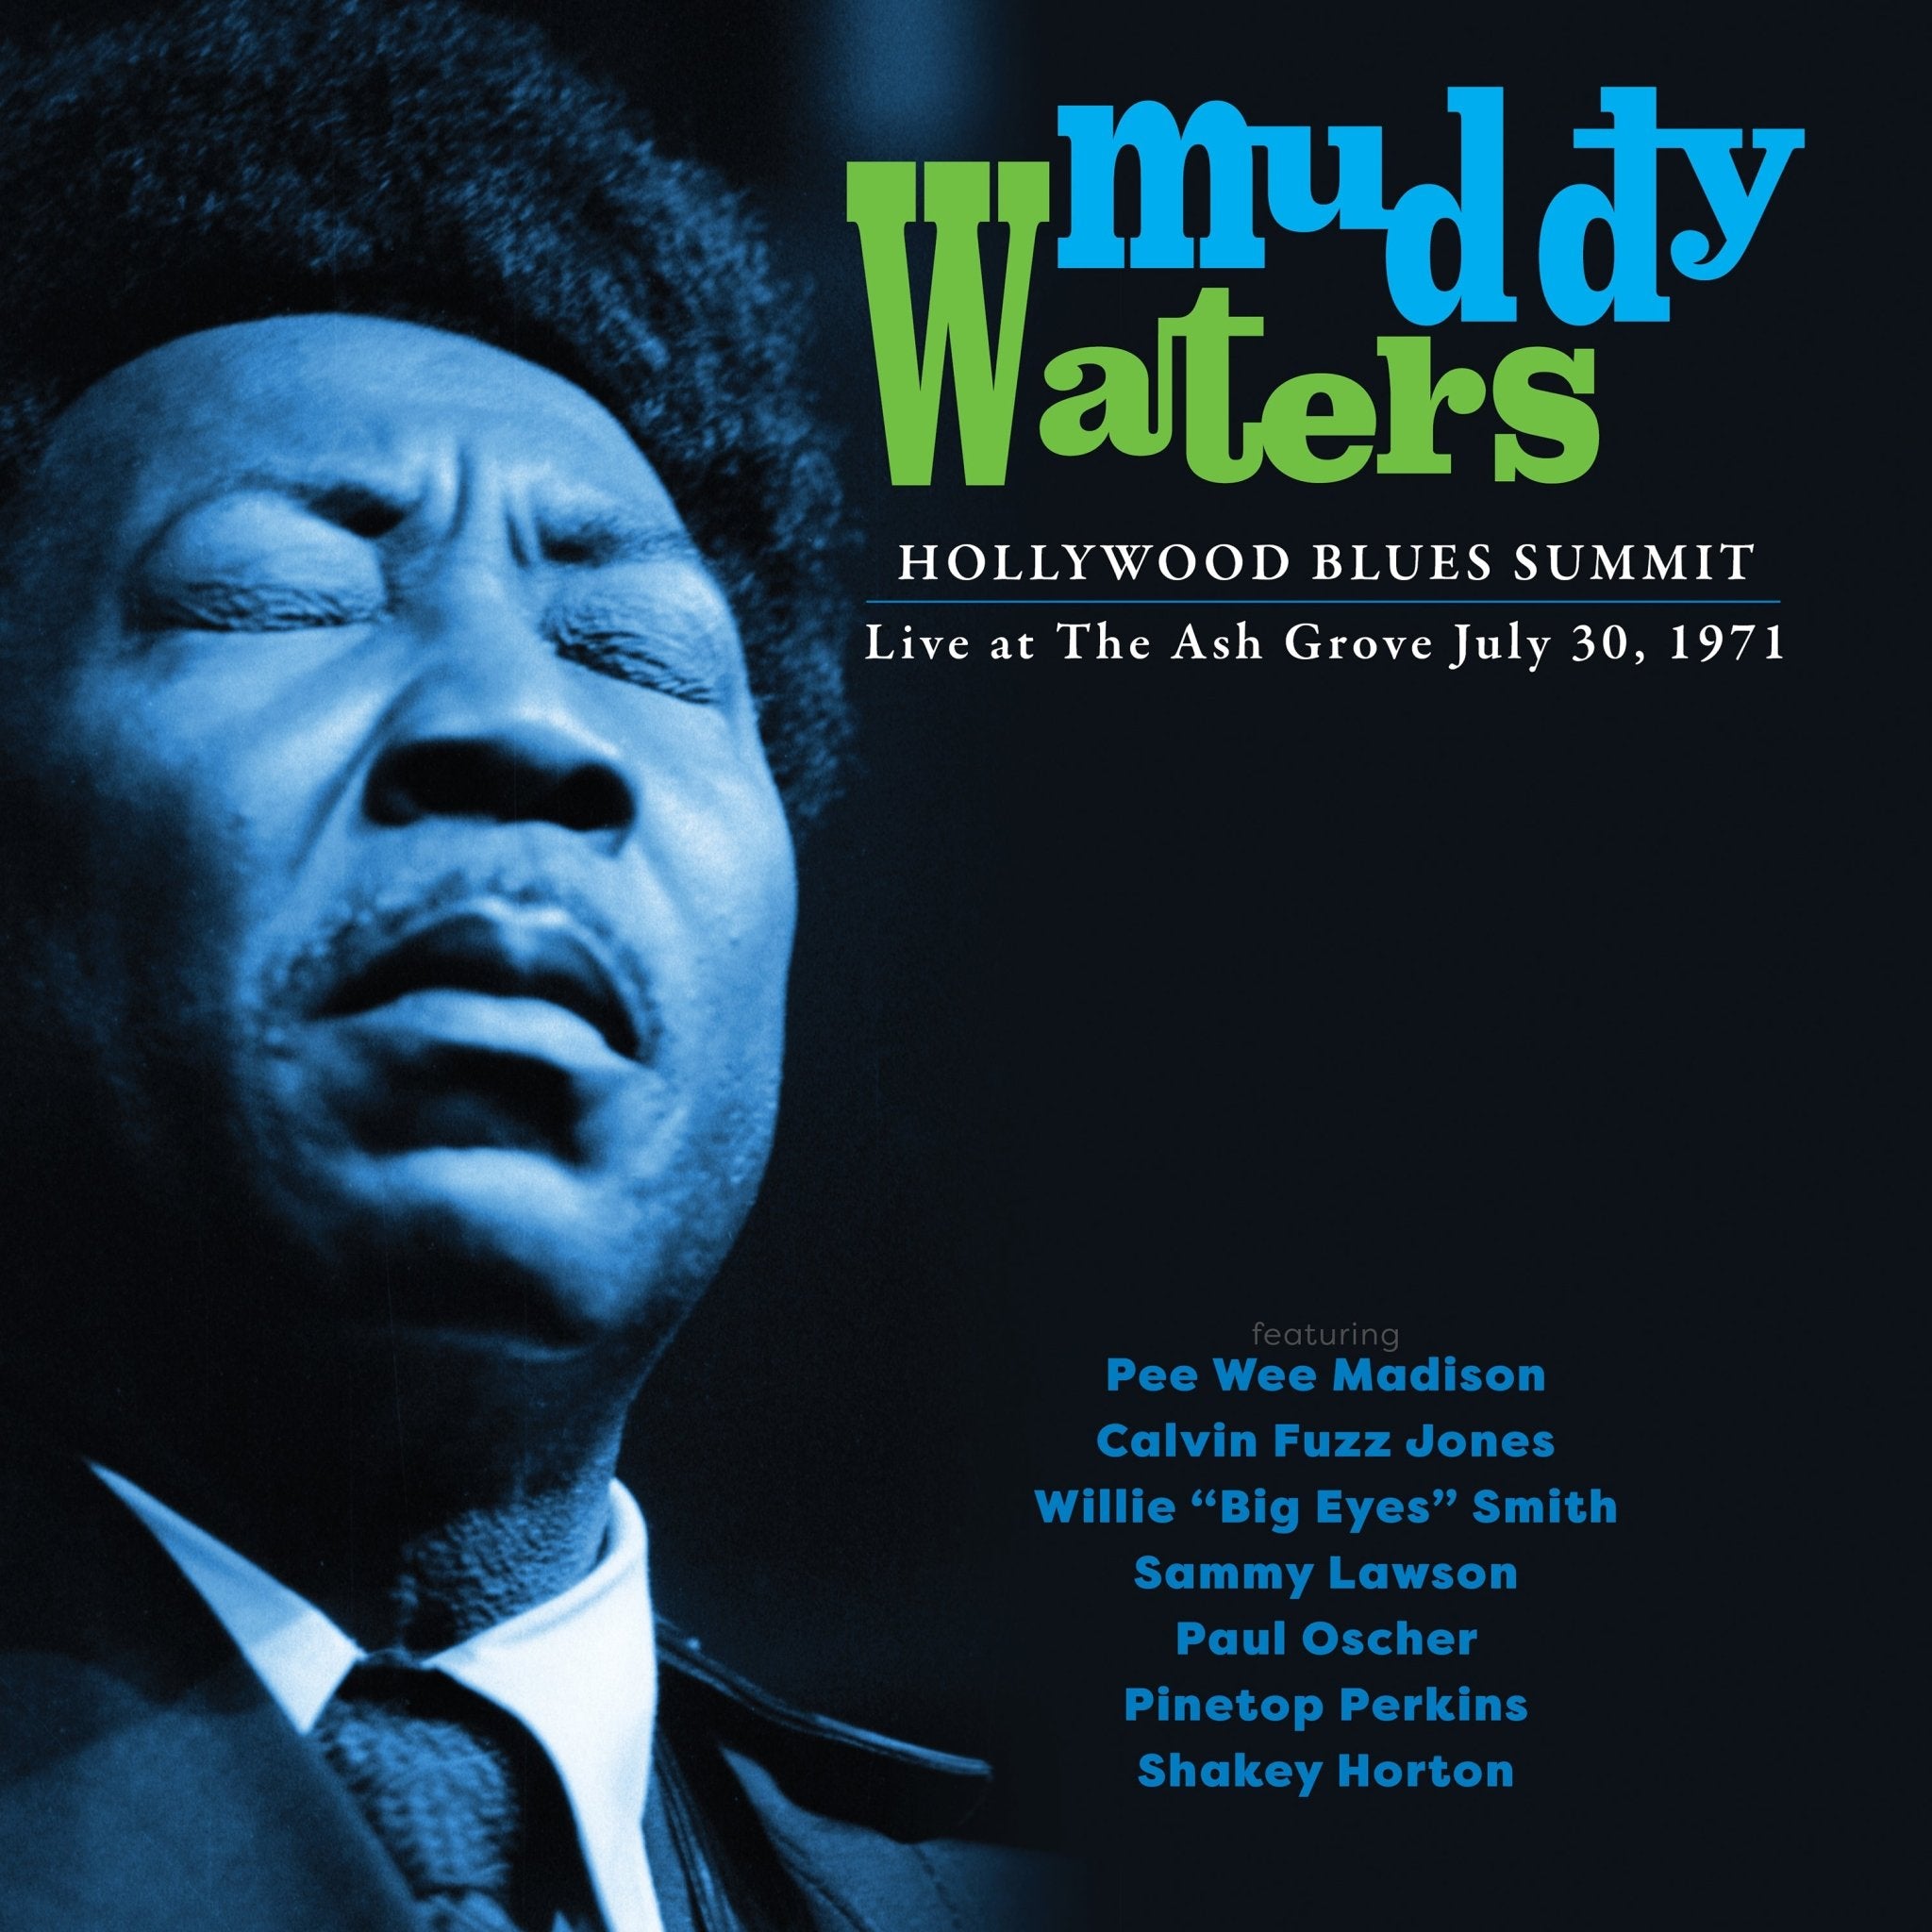 Muddy Waters - Hollywood Blues Summit 1971 - 33RPM